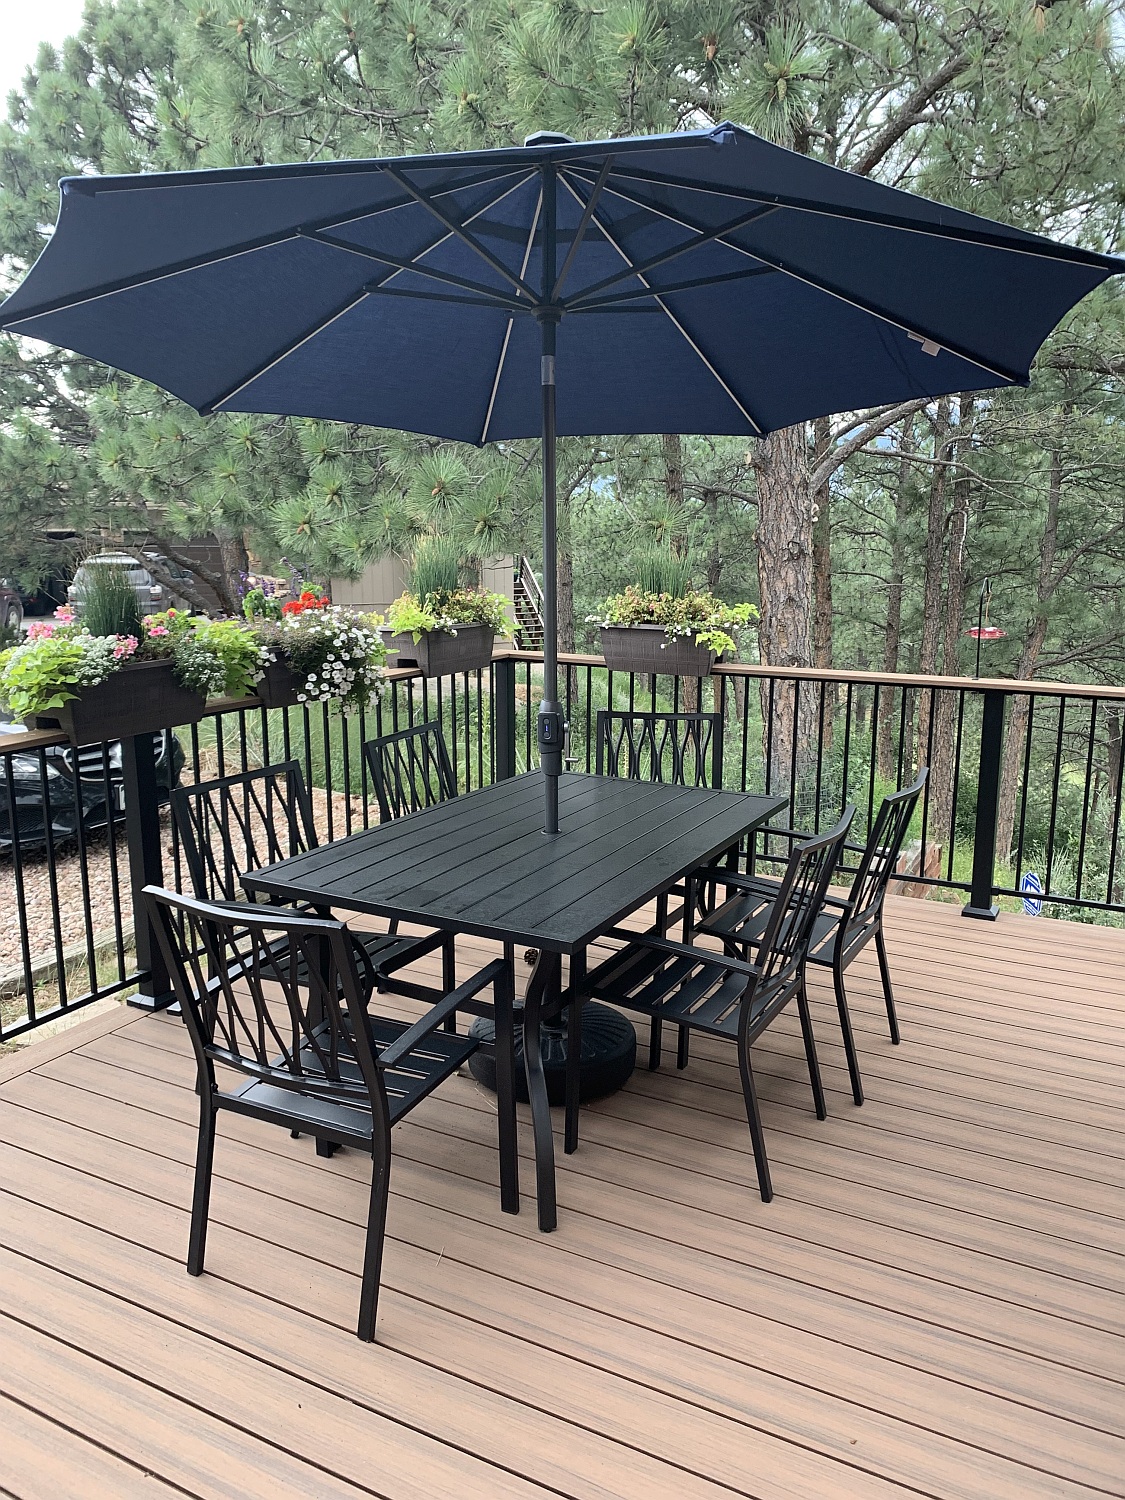 Composite deck with a black metal railing. The owners have added flower boxes along the railing and a dining area for entertaining.